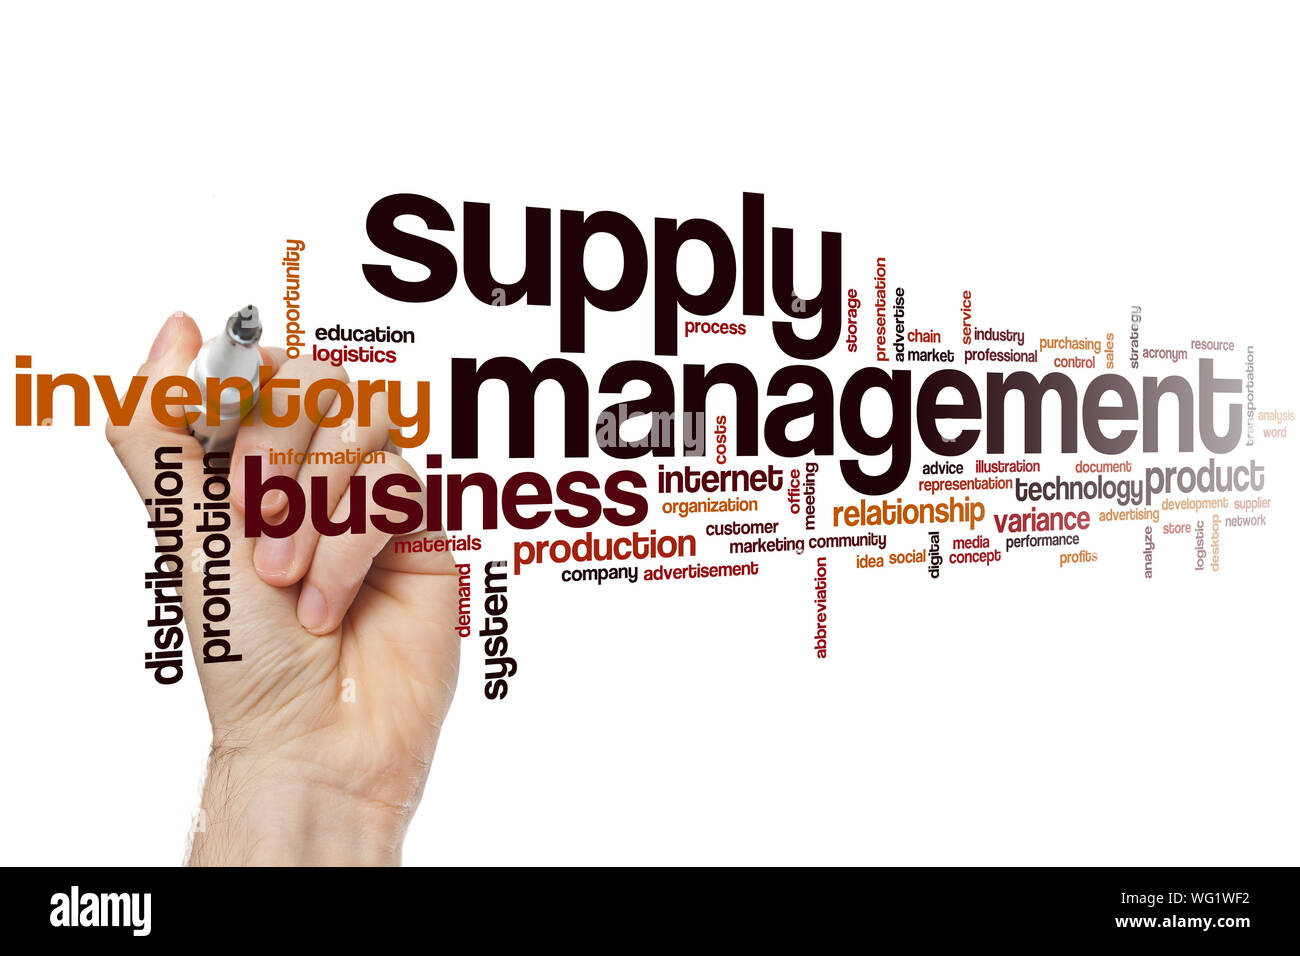 Supply management word cloud concept Stock Photo